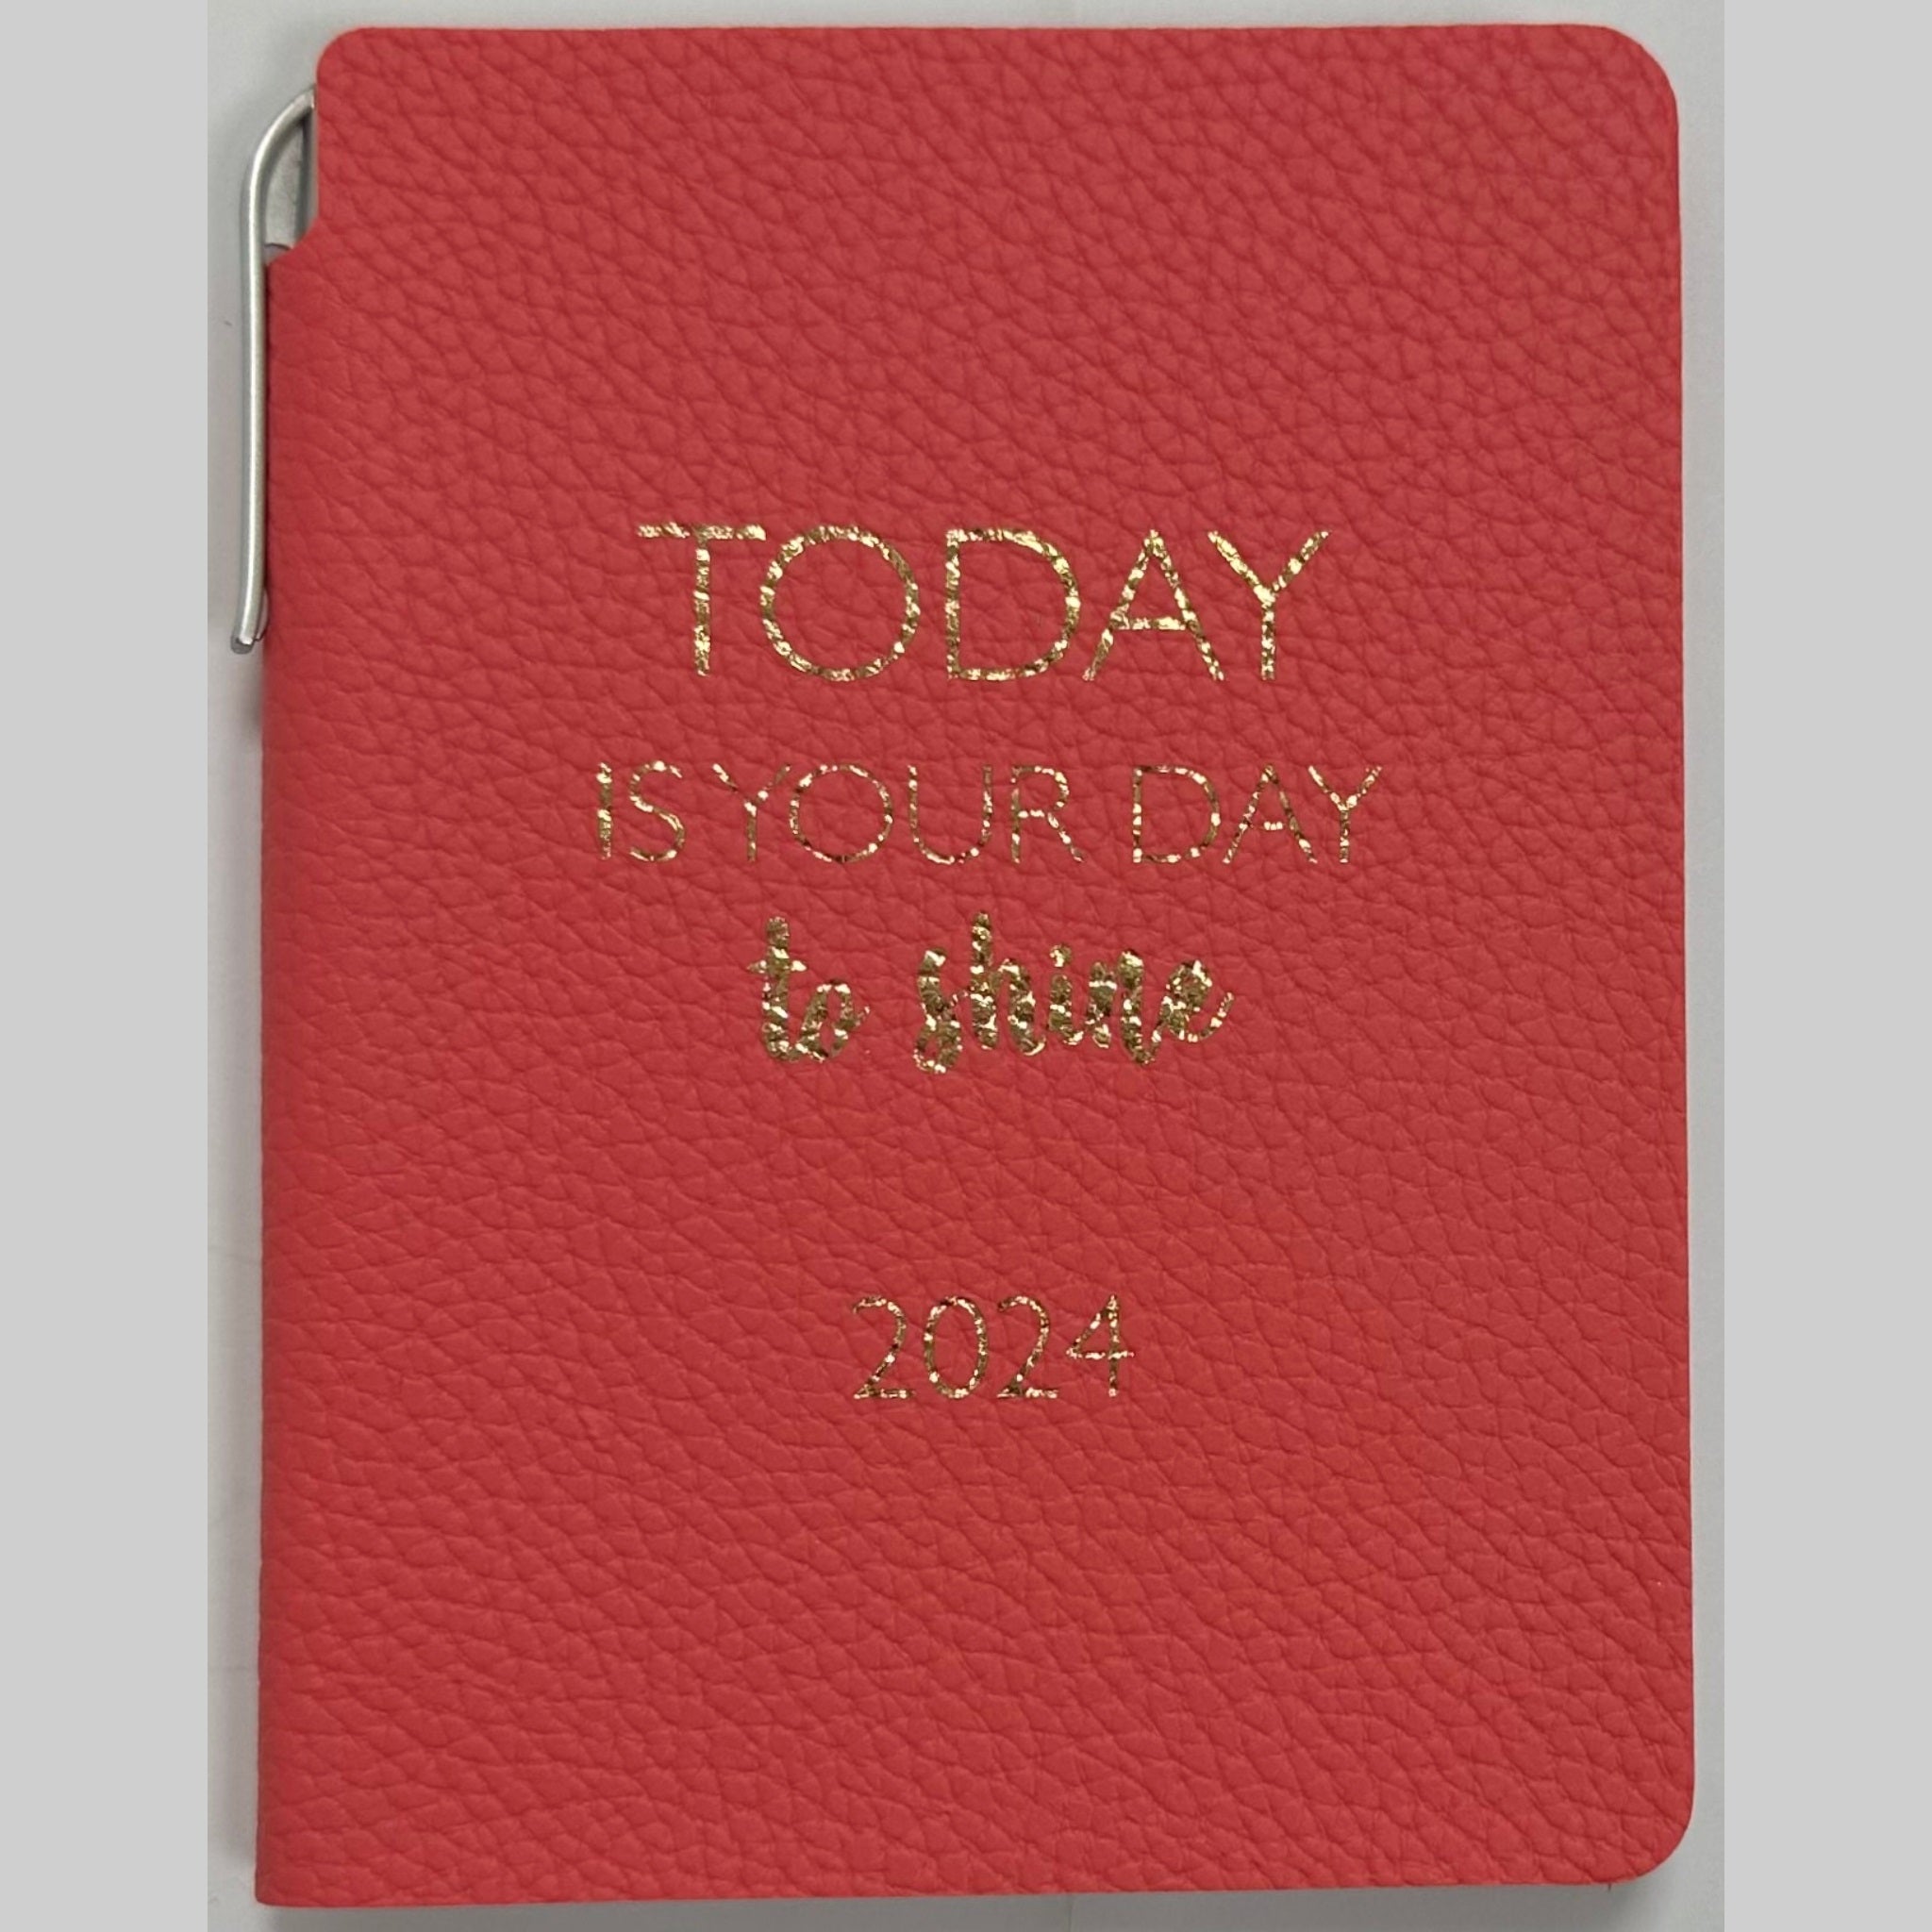 Beclen Harp 2024 A6 Size Week To View/WTV & Day A Page/ DAP Personal Luxury Effect Diary